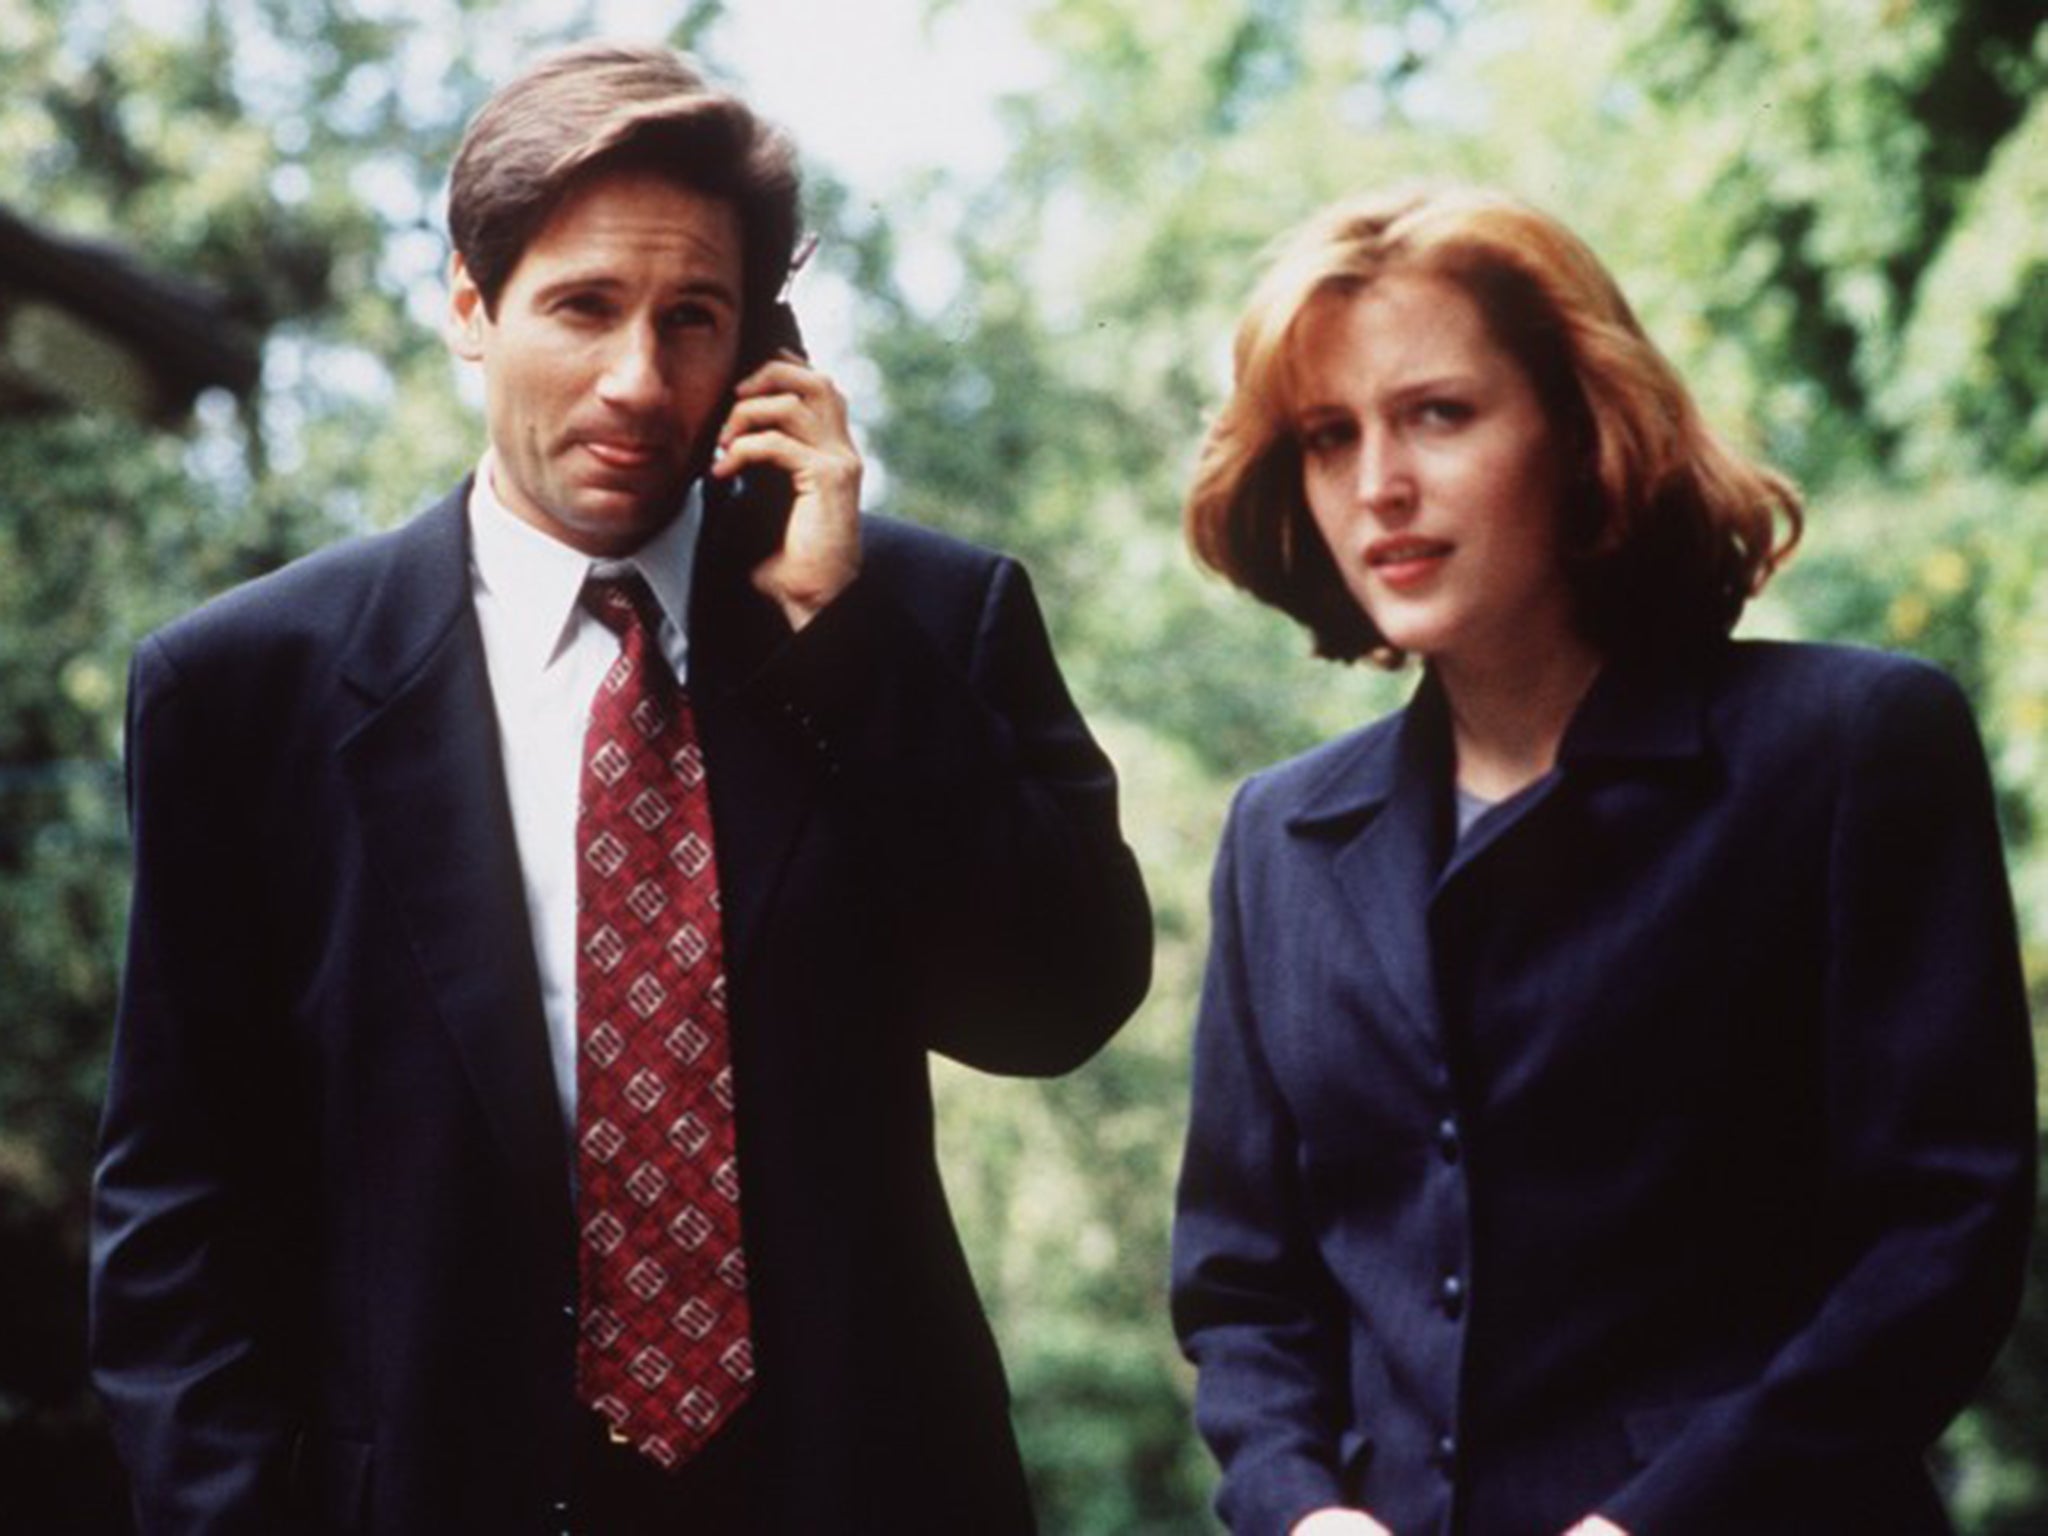 Mulder and Scully are returning for a limited reboot of The X-Files